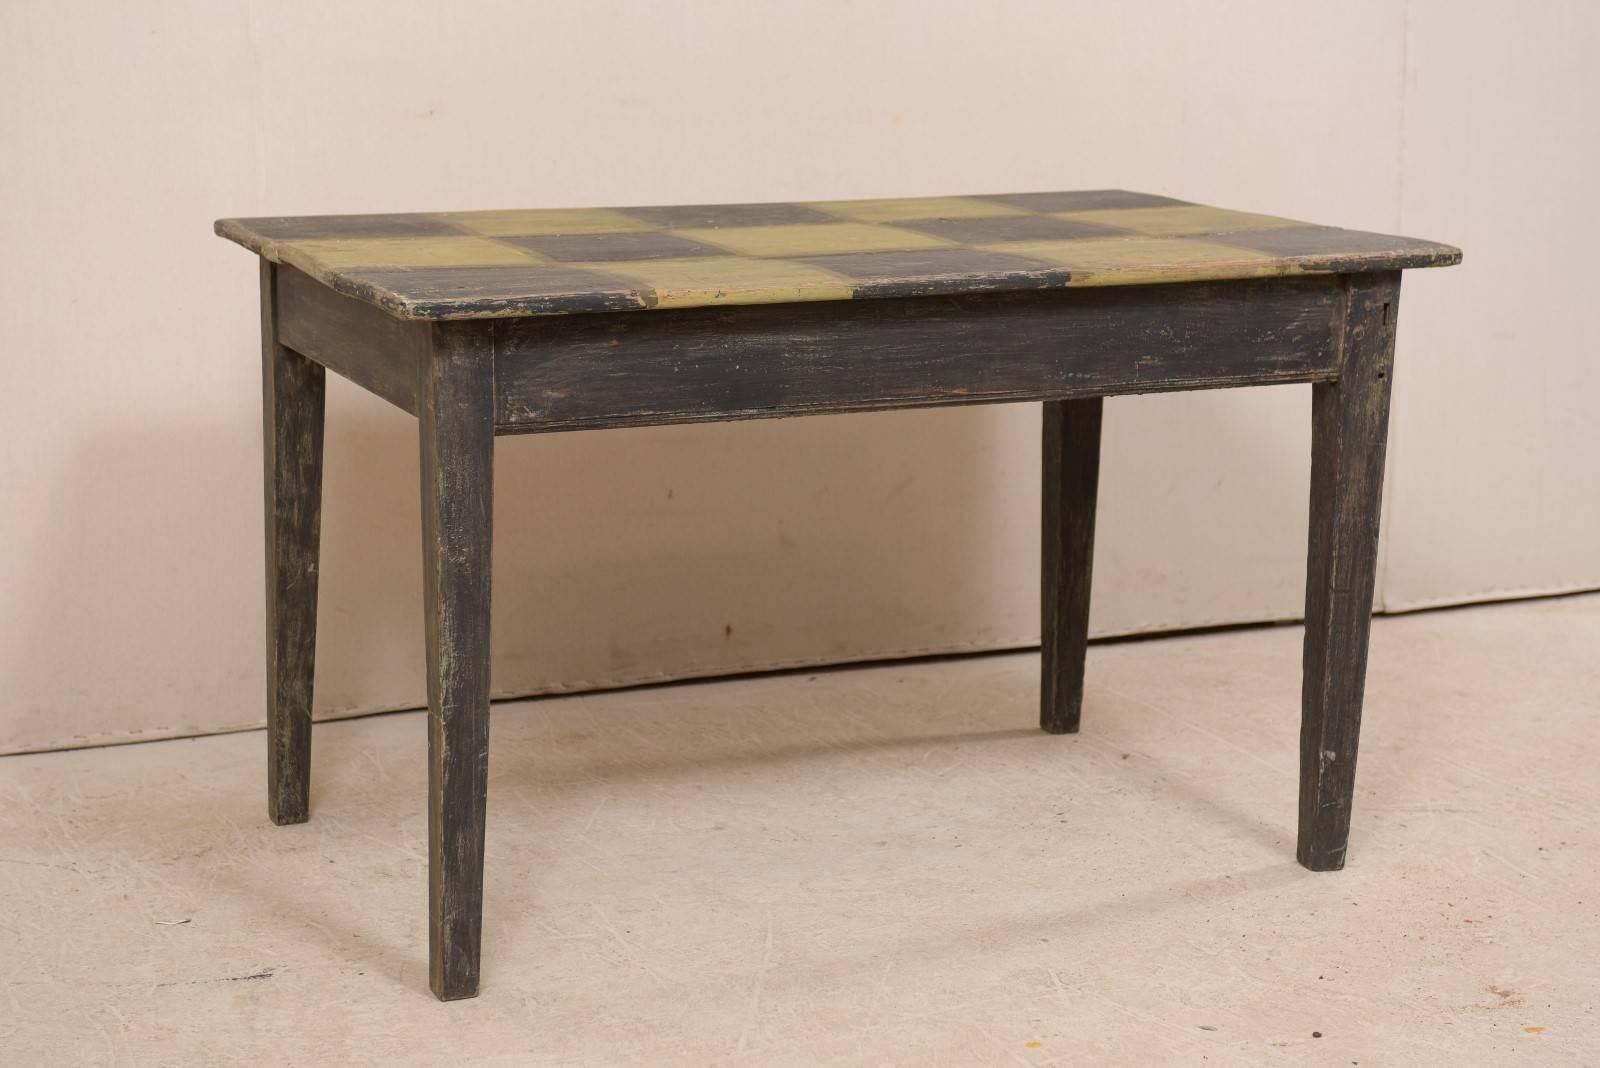 A Swedish 19th century painted checker top table. This fun antique table from Sweden features clean, simple lines, which have been contrasted nicely with it's whimsically painted checker top. This table has a rectangular-shaped top with plain apron